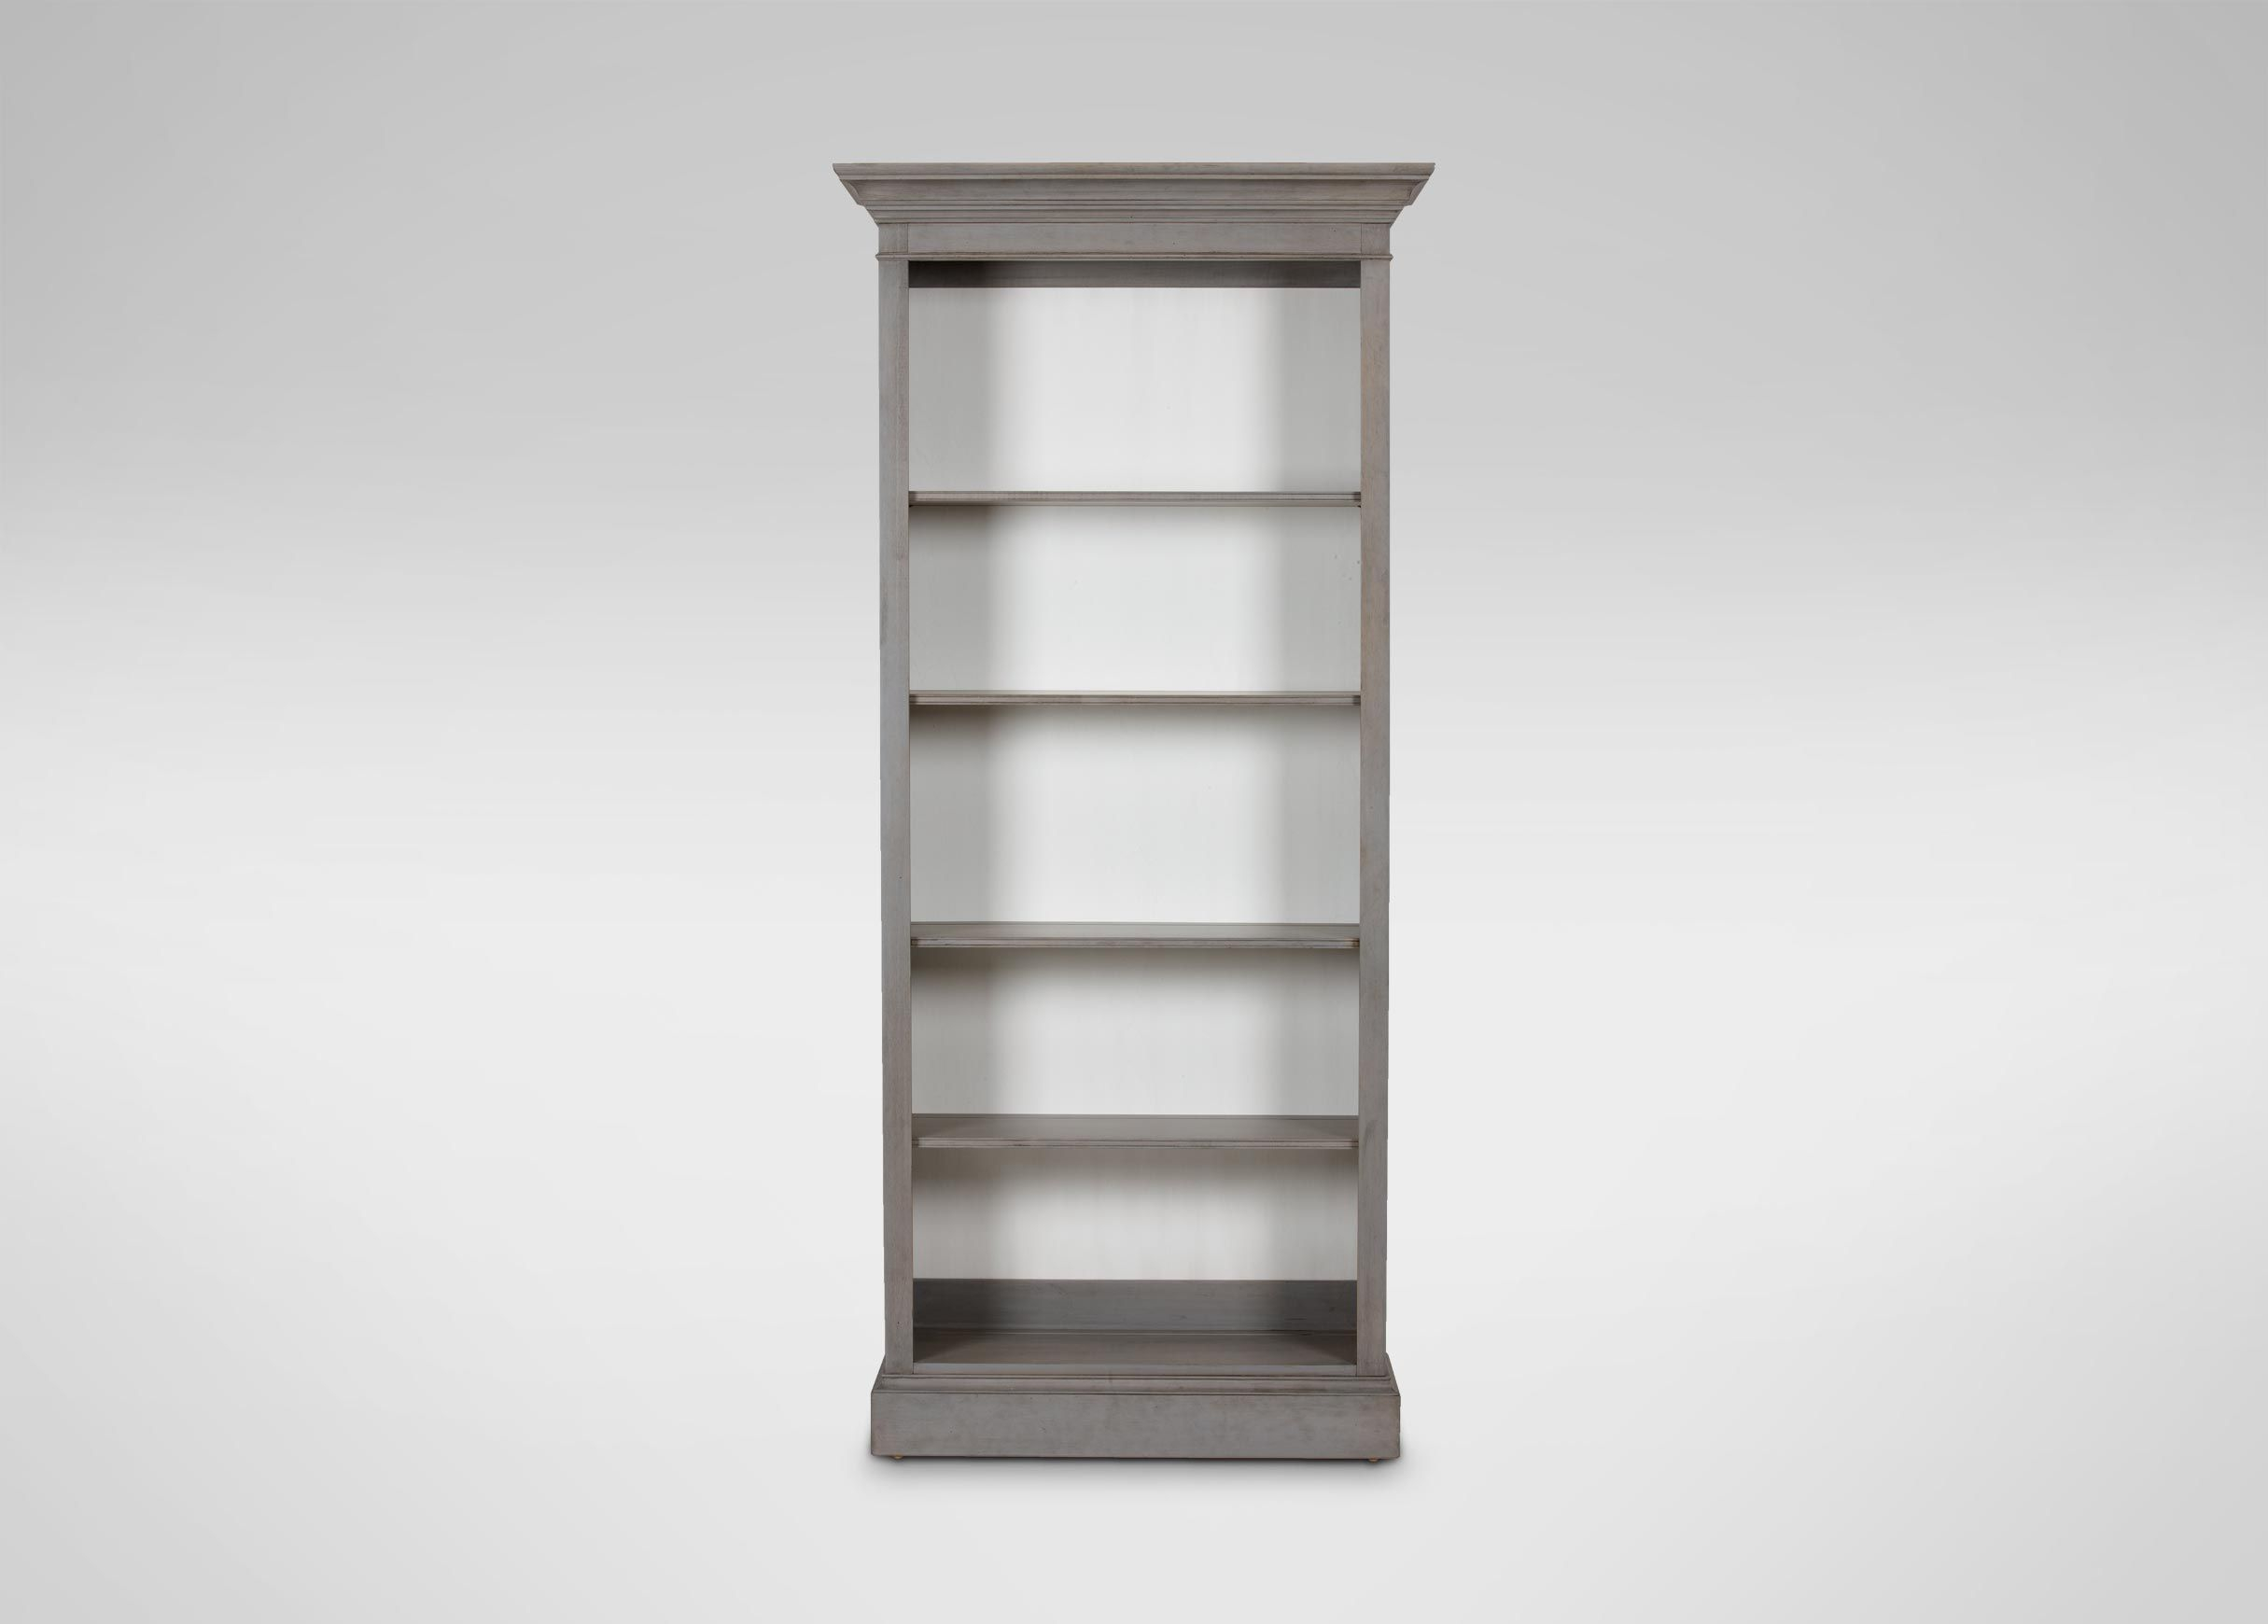 Villa Bookcase Oversized For Many Books Domov Domov intended for dimensions 2430 X 1740